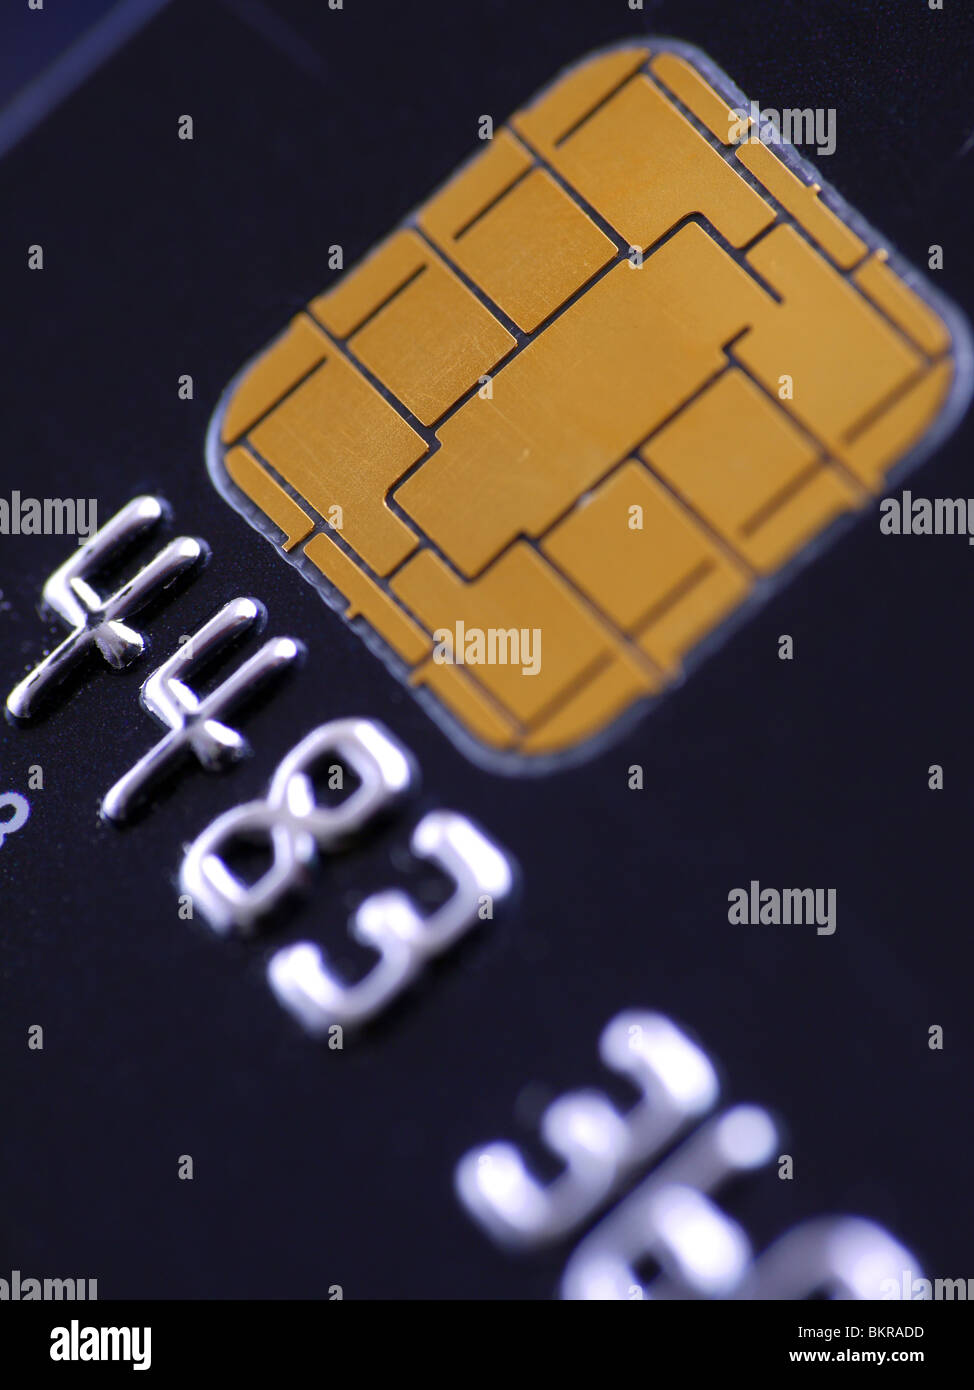 Extreme closeup of black microchip credit card Stock Photo